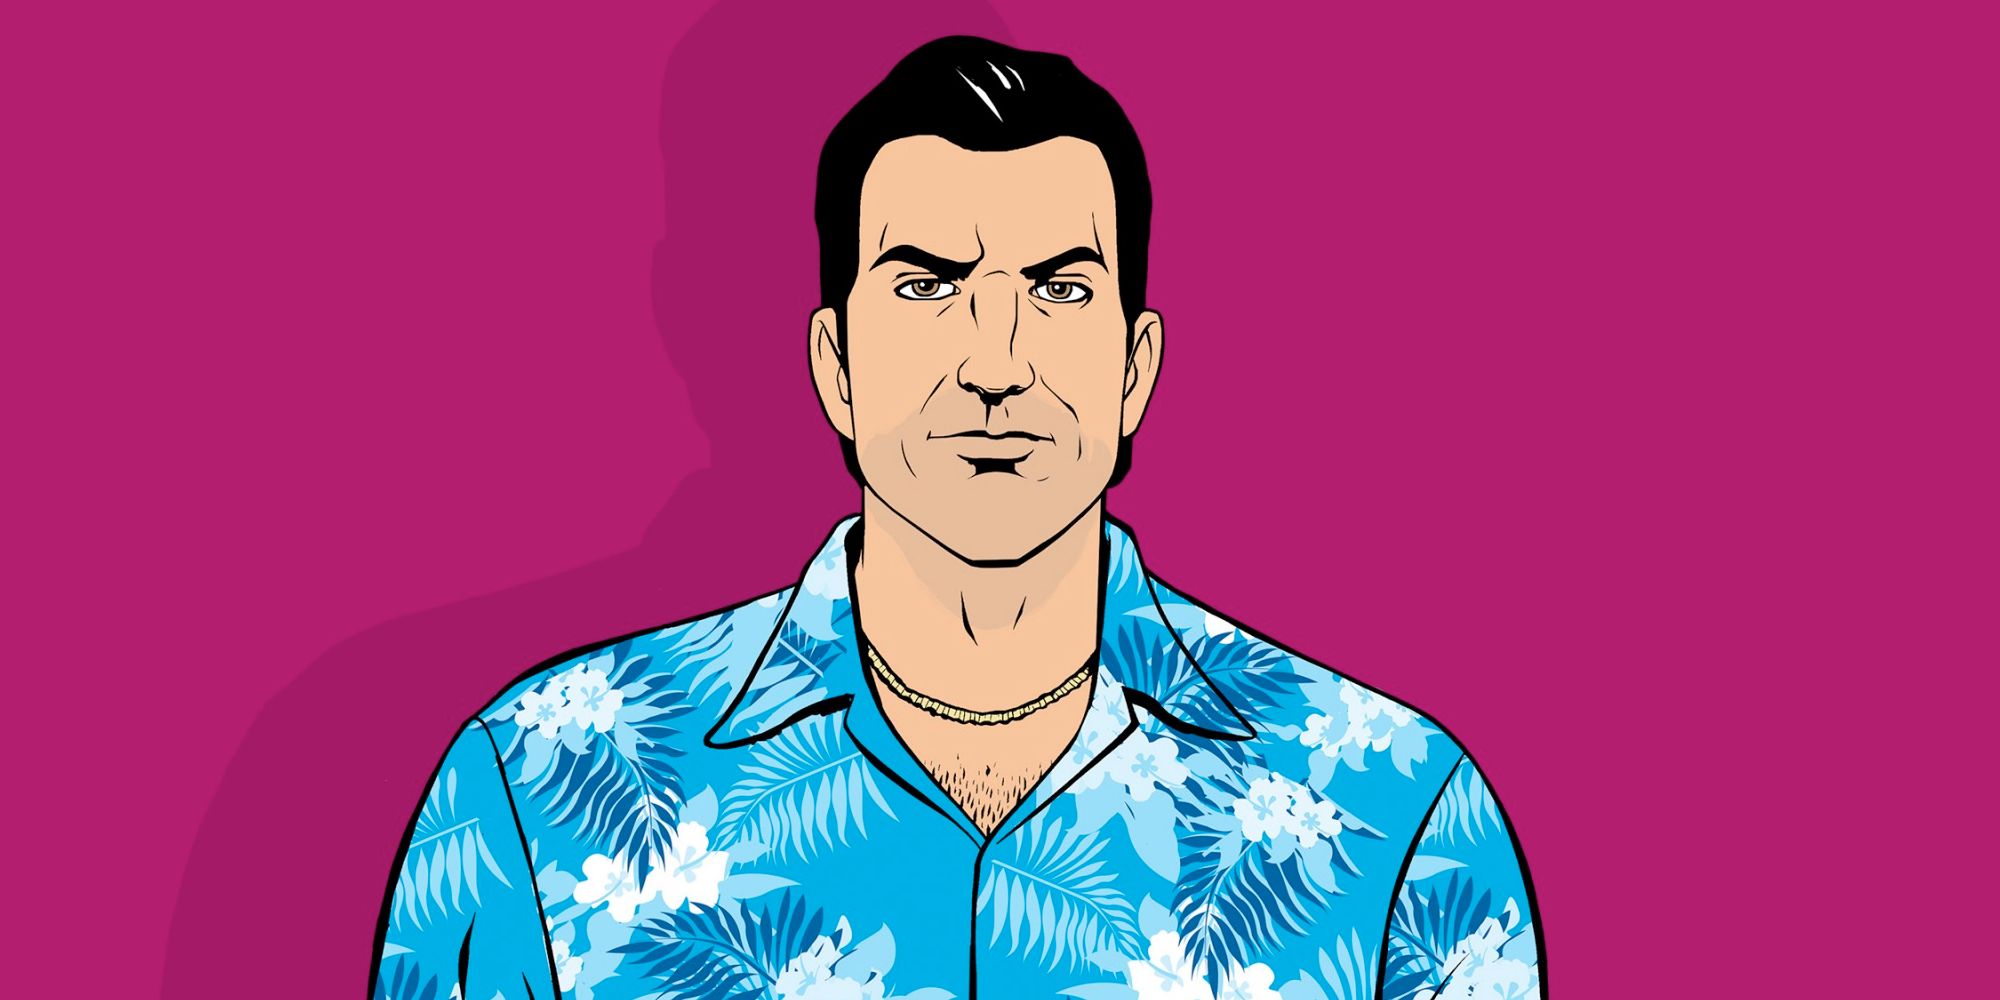 20 Years Later, Tommy Vercetti Is Still The Greatest GTA Protagonist